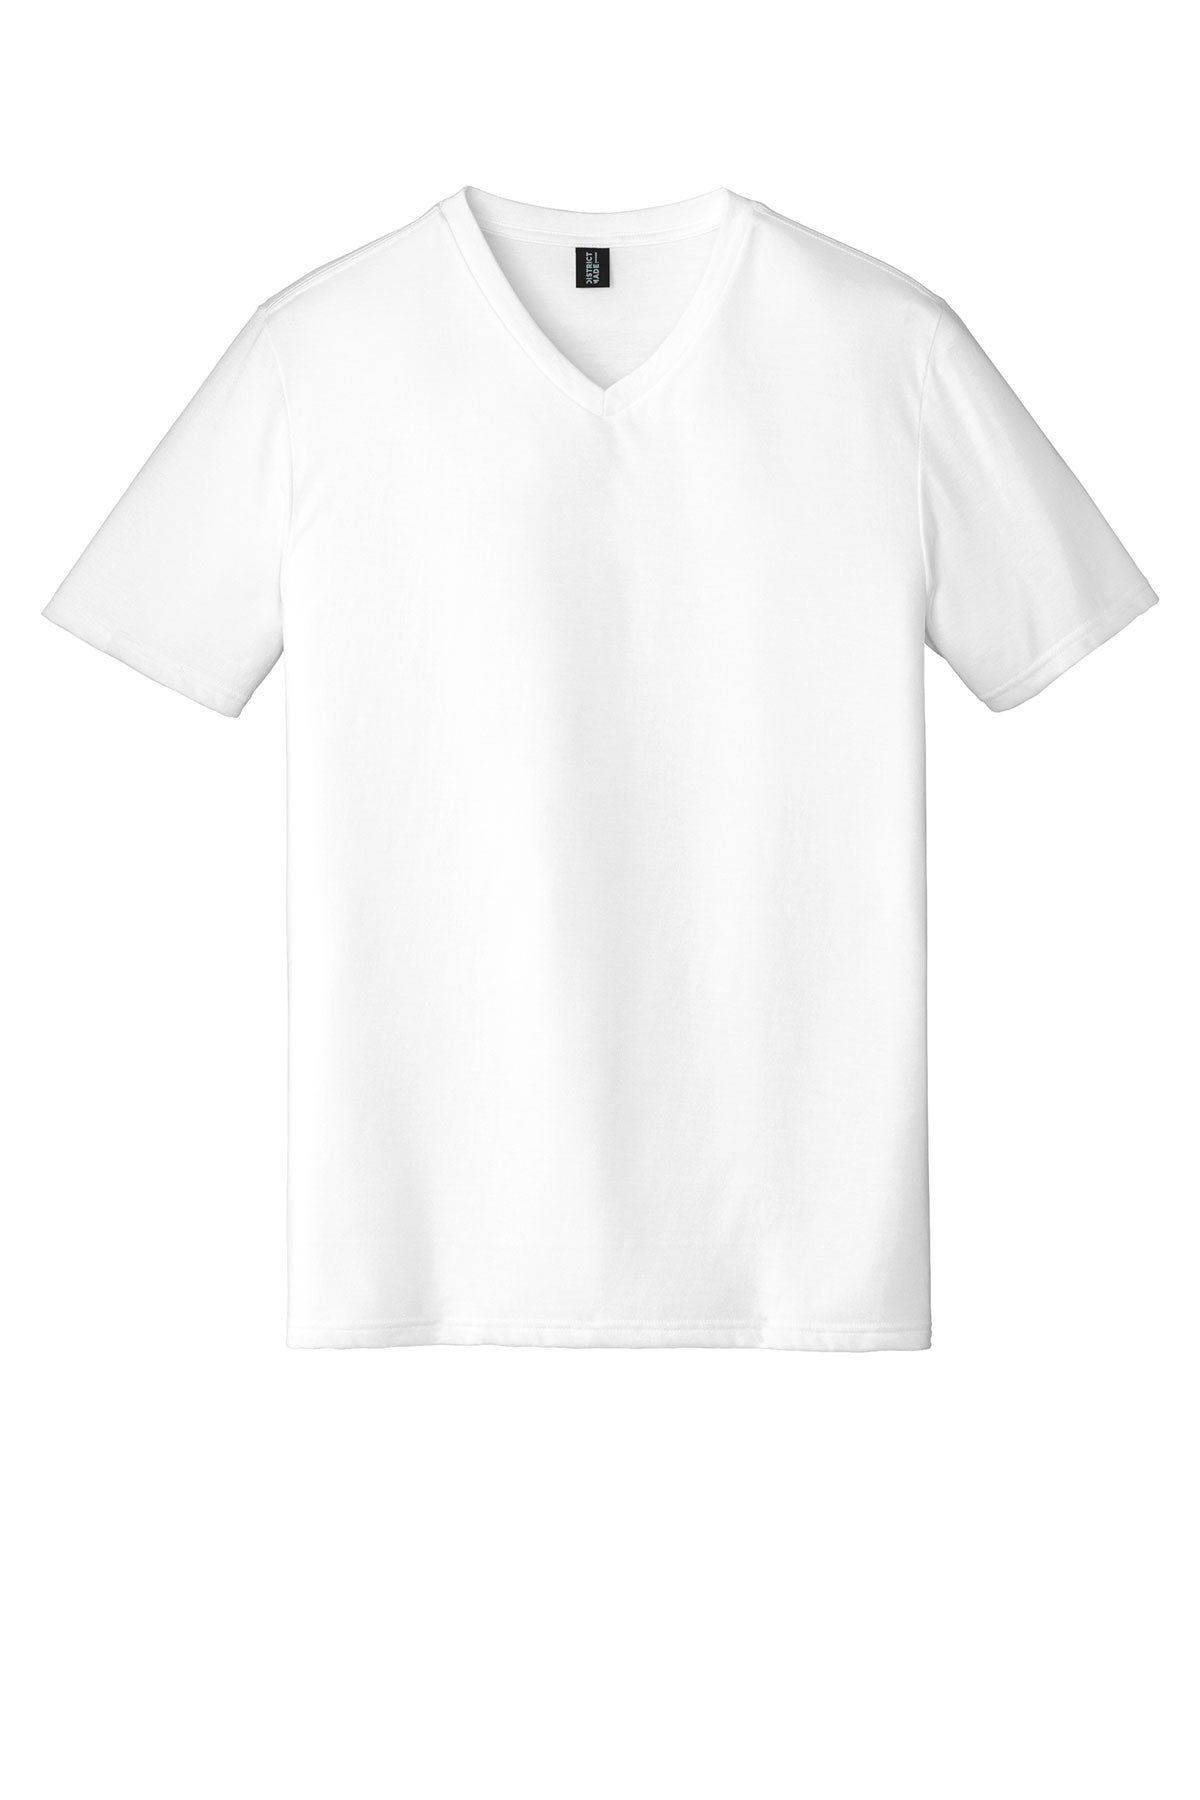 DT1350 District ® Perfect Tri ® V-Neck Tee